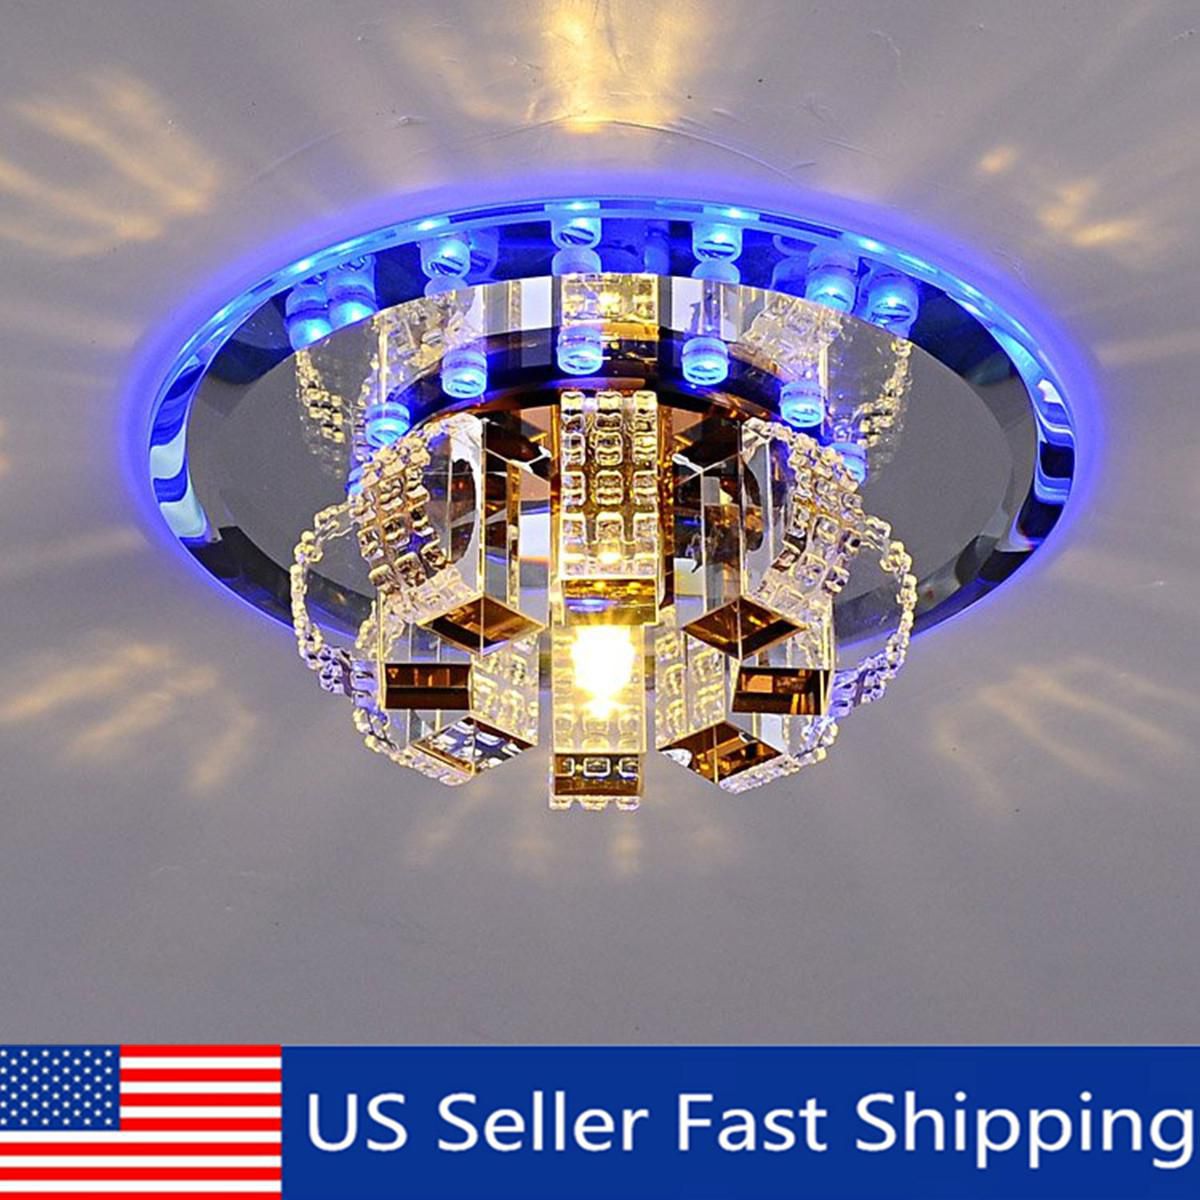 Modern Crystal Led Ceiling Light Fixture Aisle Hallway Pendant Lamp Chandelier At Low In India Snapdeal - Modern Led Ceiling Chandelier Lights